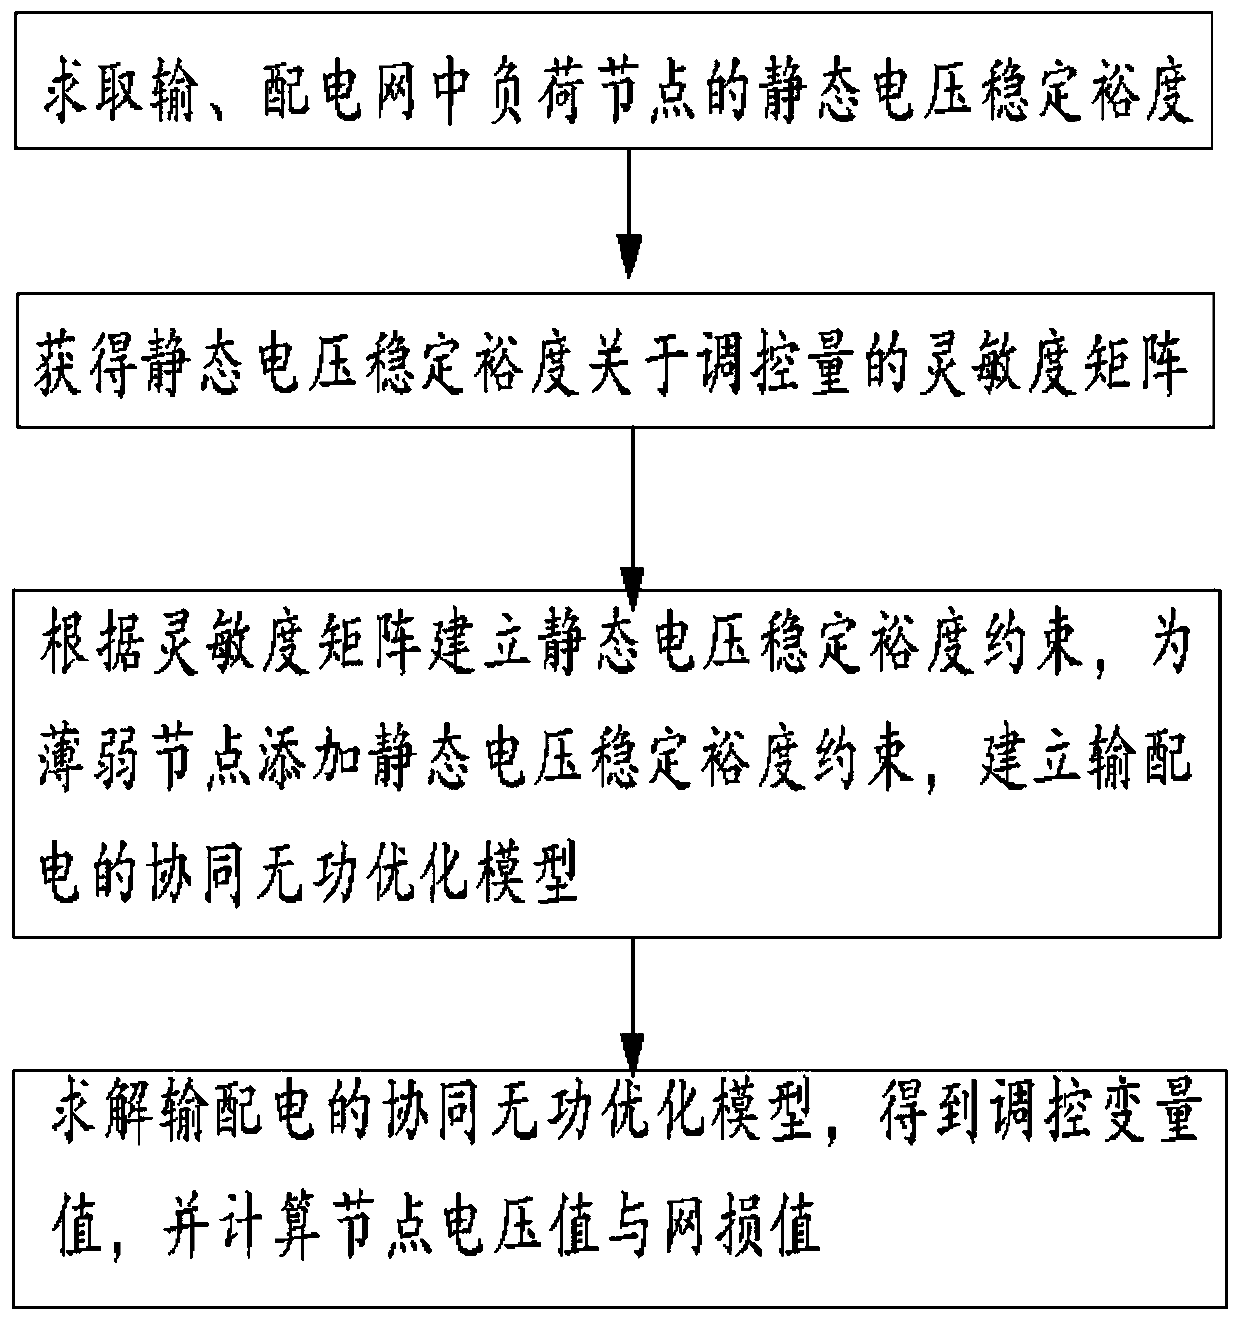 Transmission and distribution cooperative reactive power optimization method and system in consideration of static voltage safety constraint